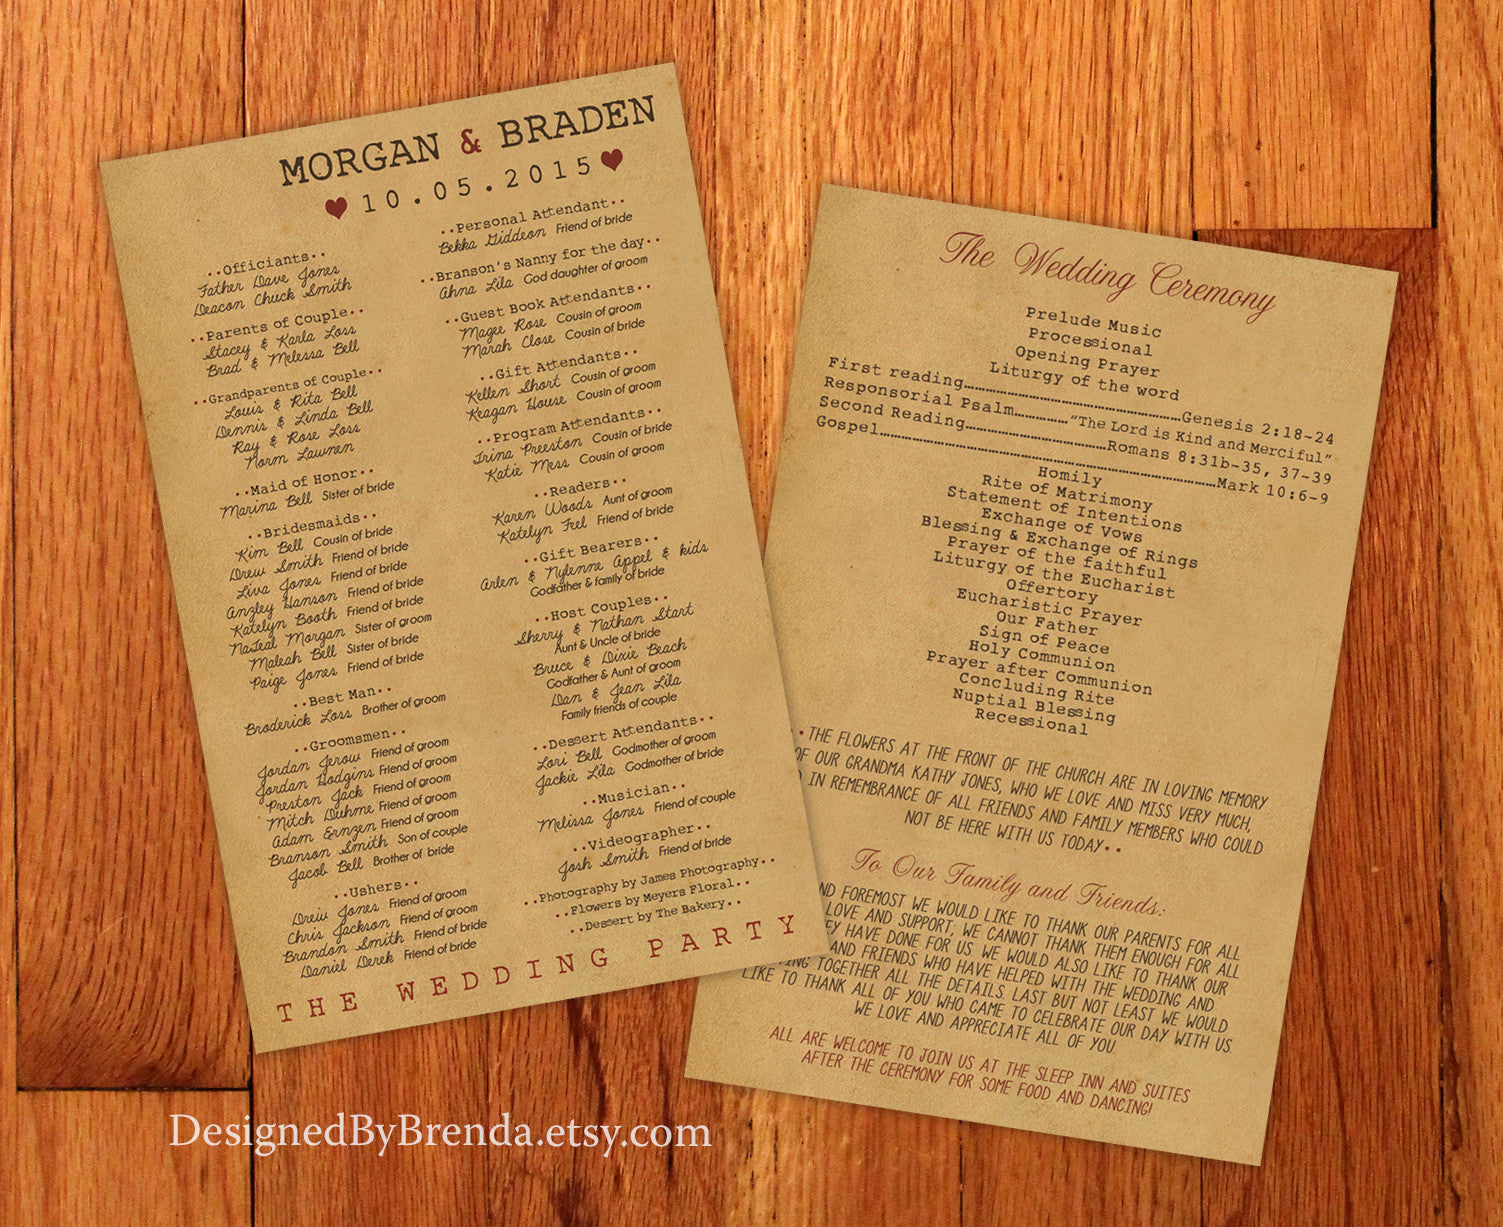 Large Vintage Style Wedding Programs - Double Sided with Rustic Kraft Paper Look